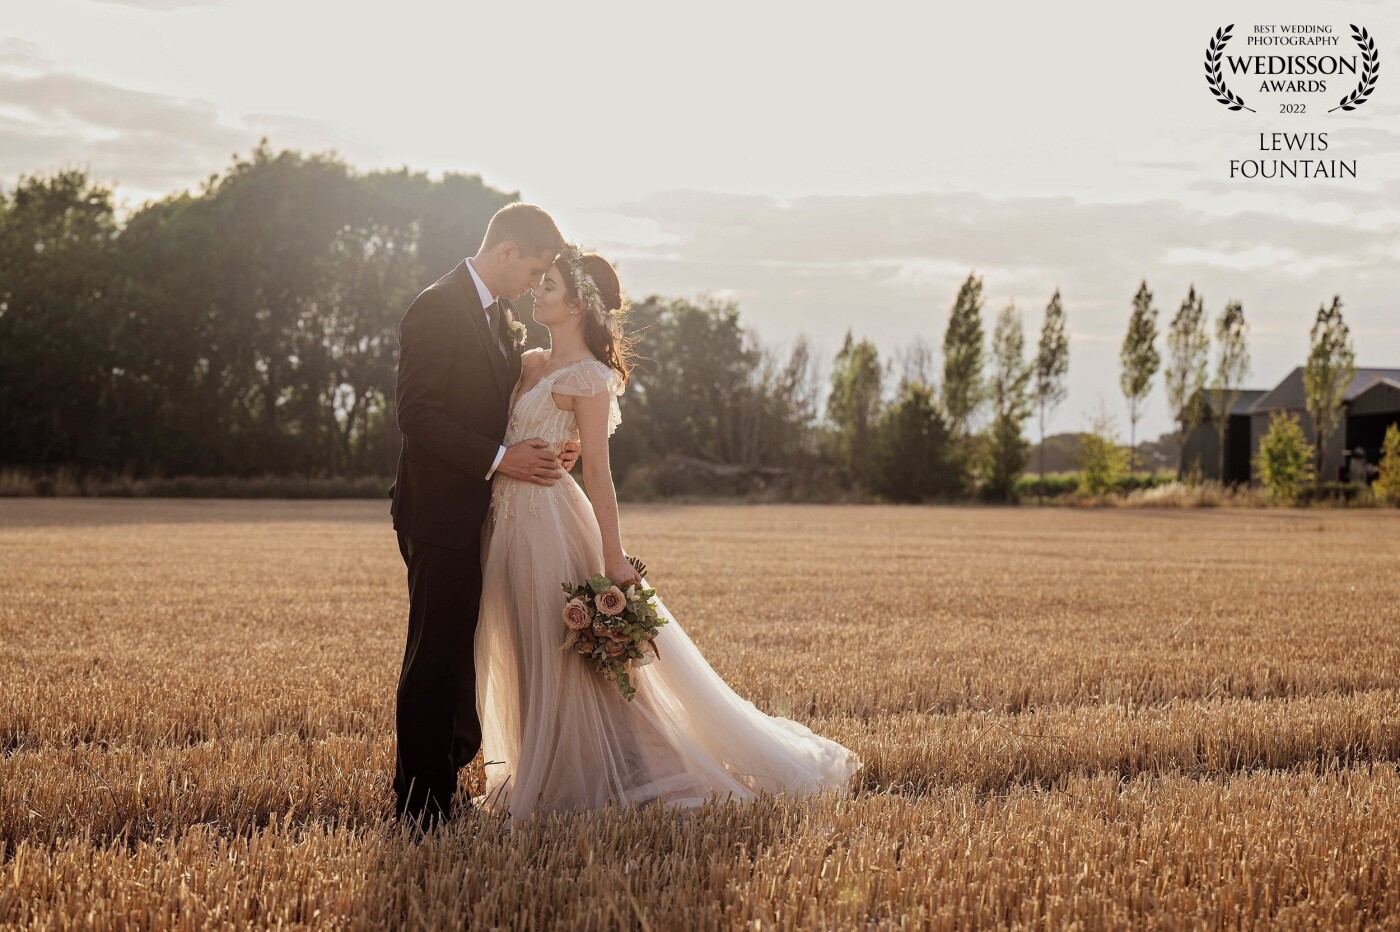 We had some beautifully soft early evening light when we took Lauren & Dan for a walk around Bassmead Manor Barns’ freshly cut wheat fields. <br />
<br />
Lauren’s dress caught the light perfectly, as the couple enjoyed a romantic moment together.